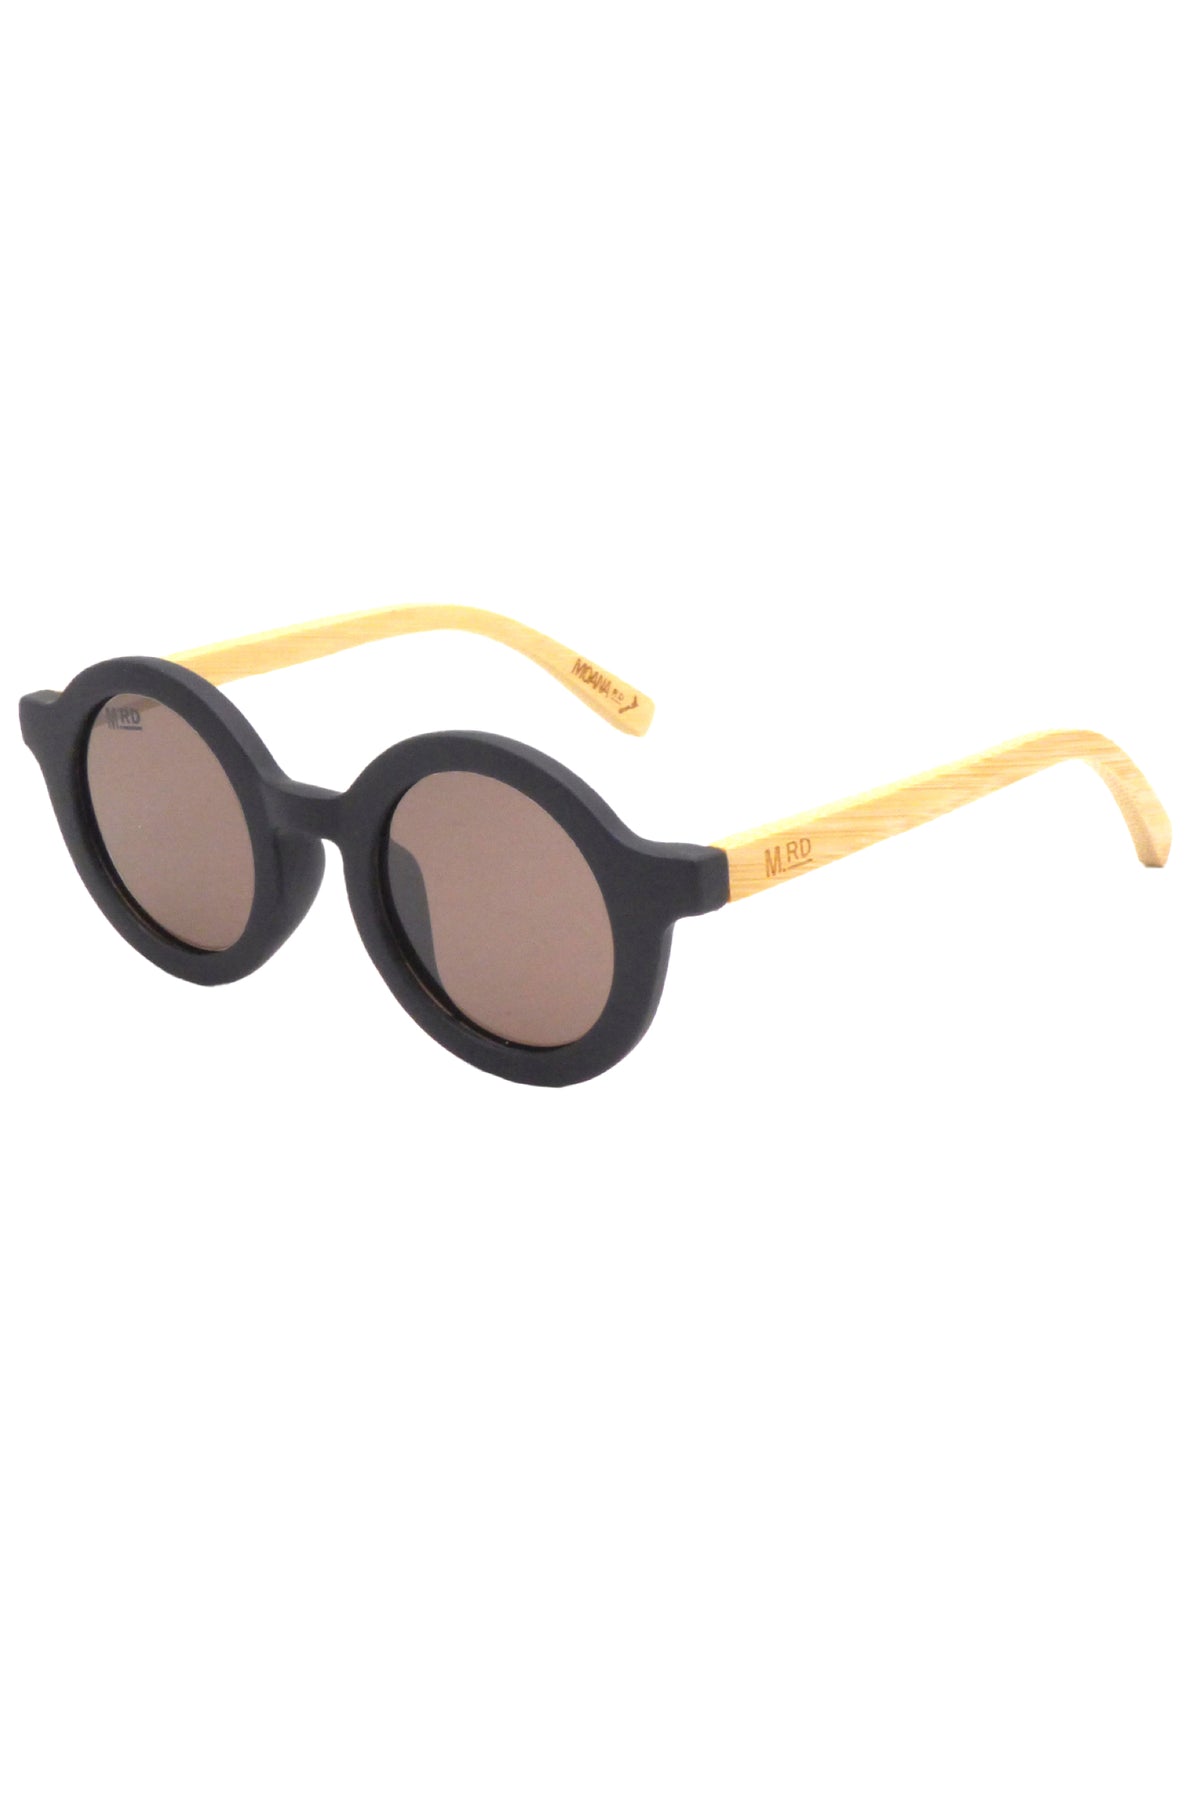 Kids Sunnies Bambino Black With Wood Arms